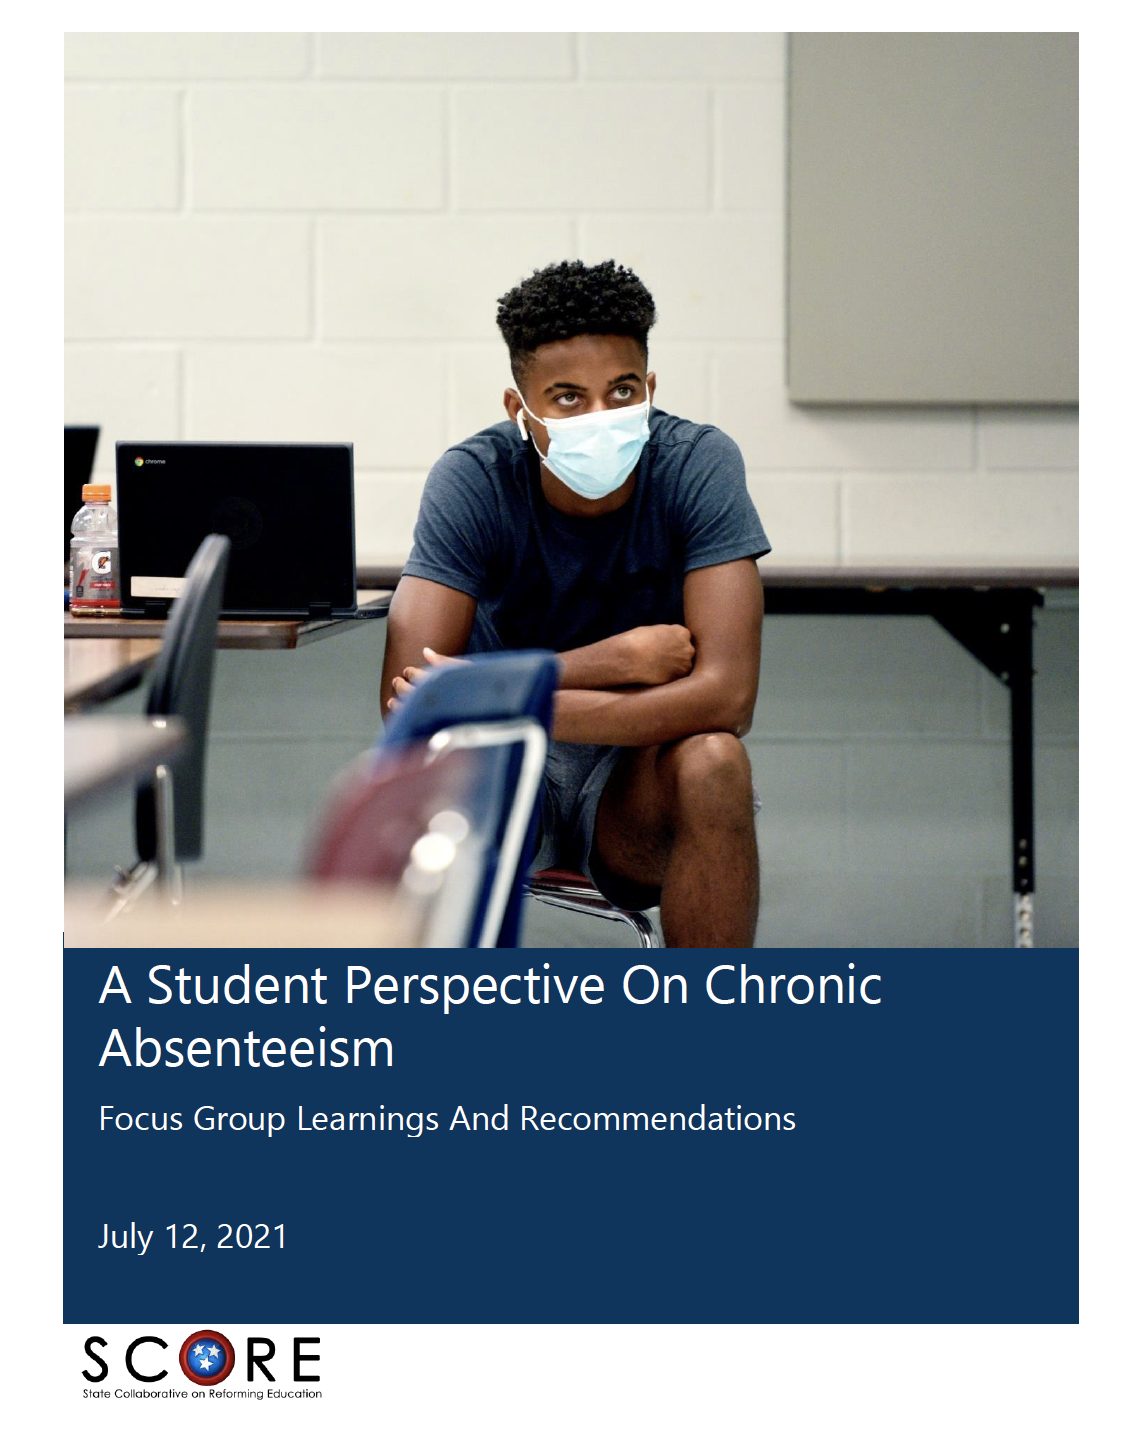 A Student Perspective On Chronic Absenteeism